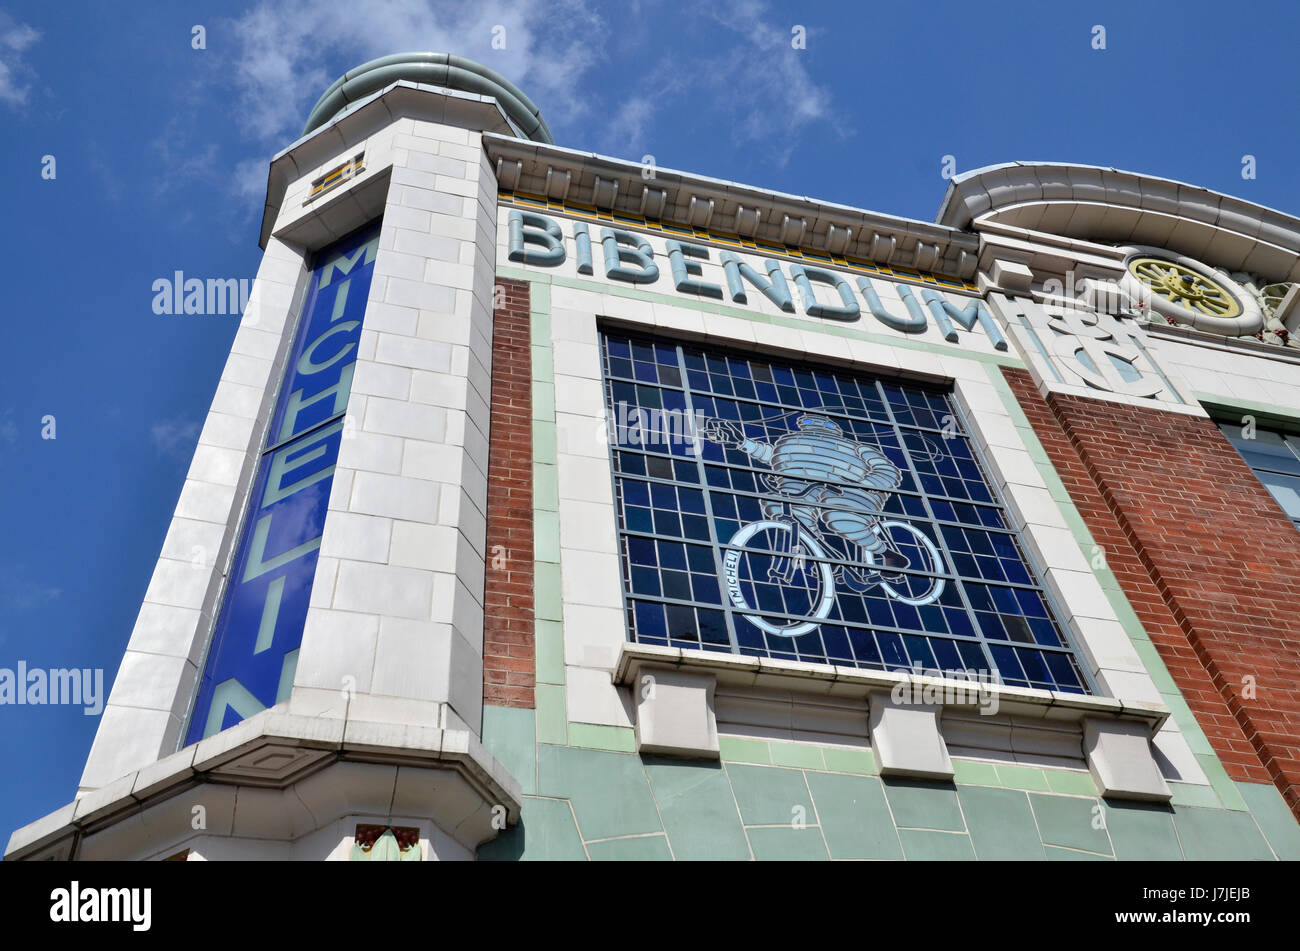 The Art Deco Bibendum Restaurant in Fulham Road, Kensington, London. The building is Michelin House, former hq of the tyre company in the UK Stock Photo